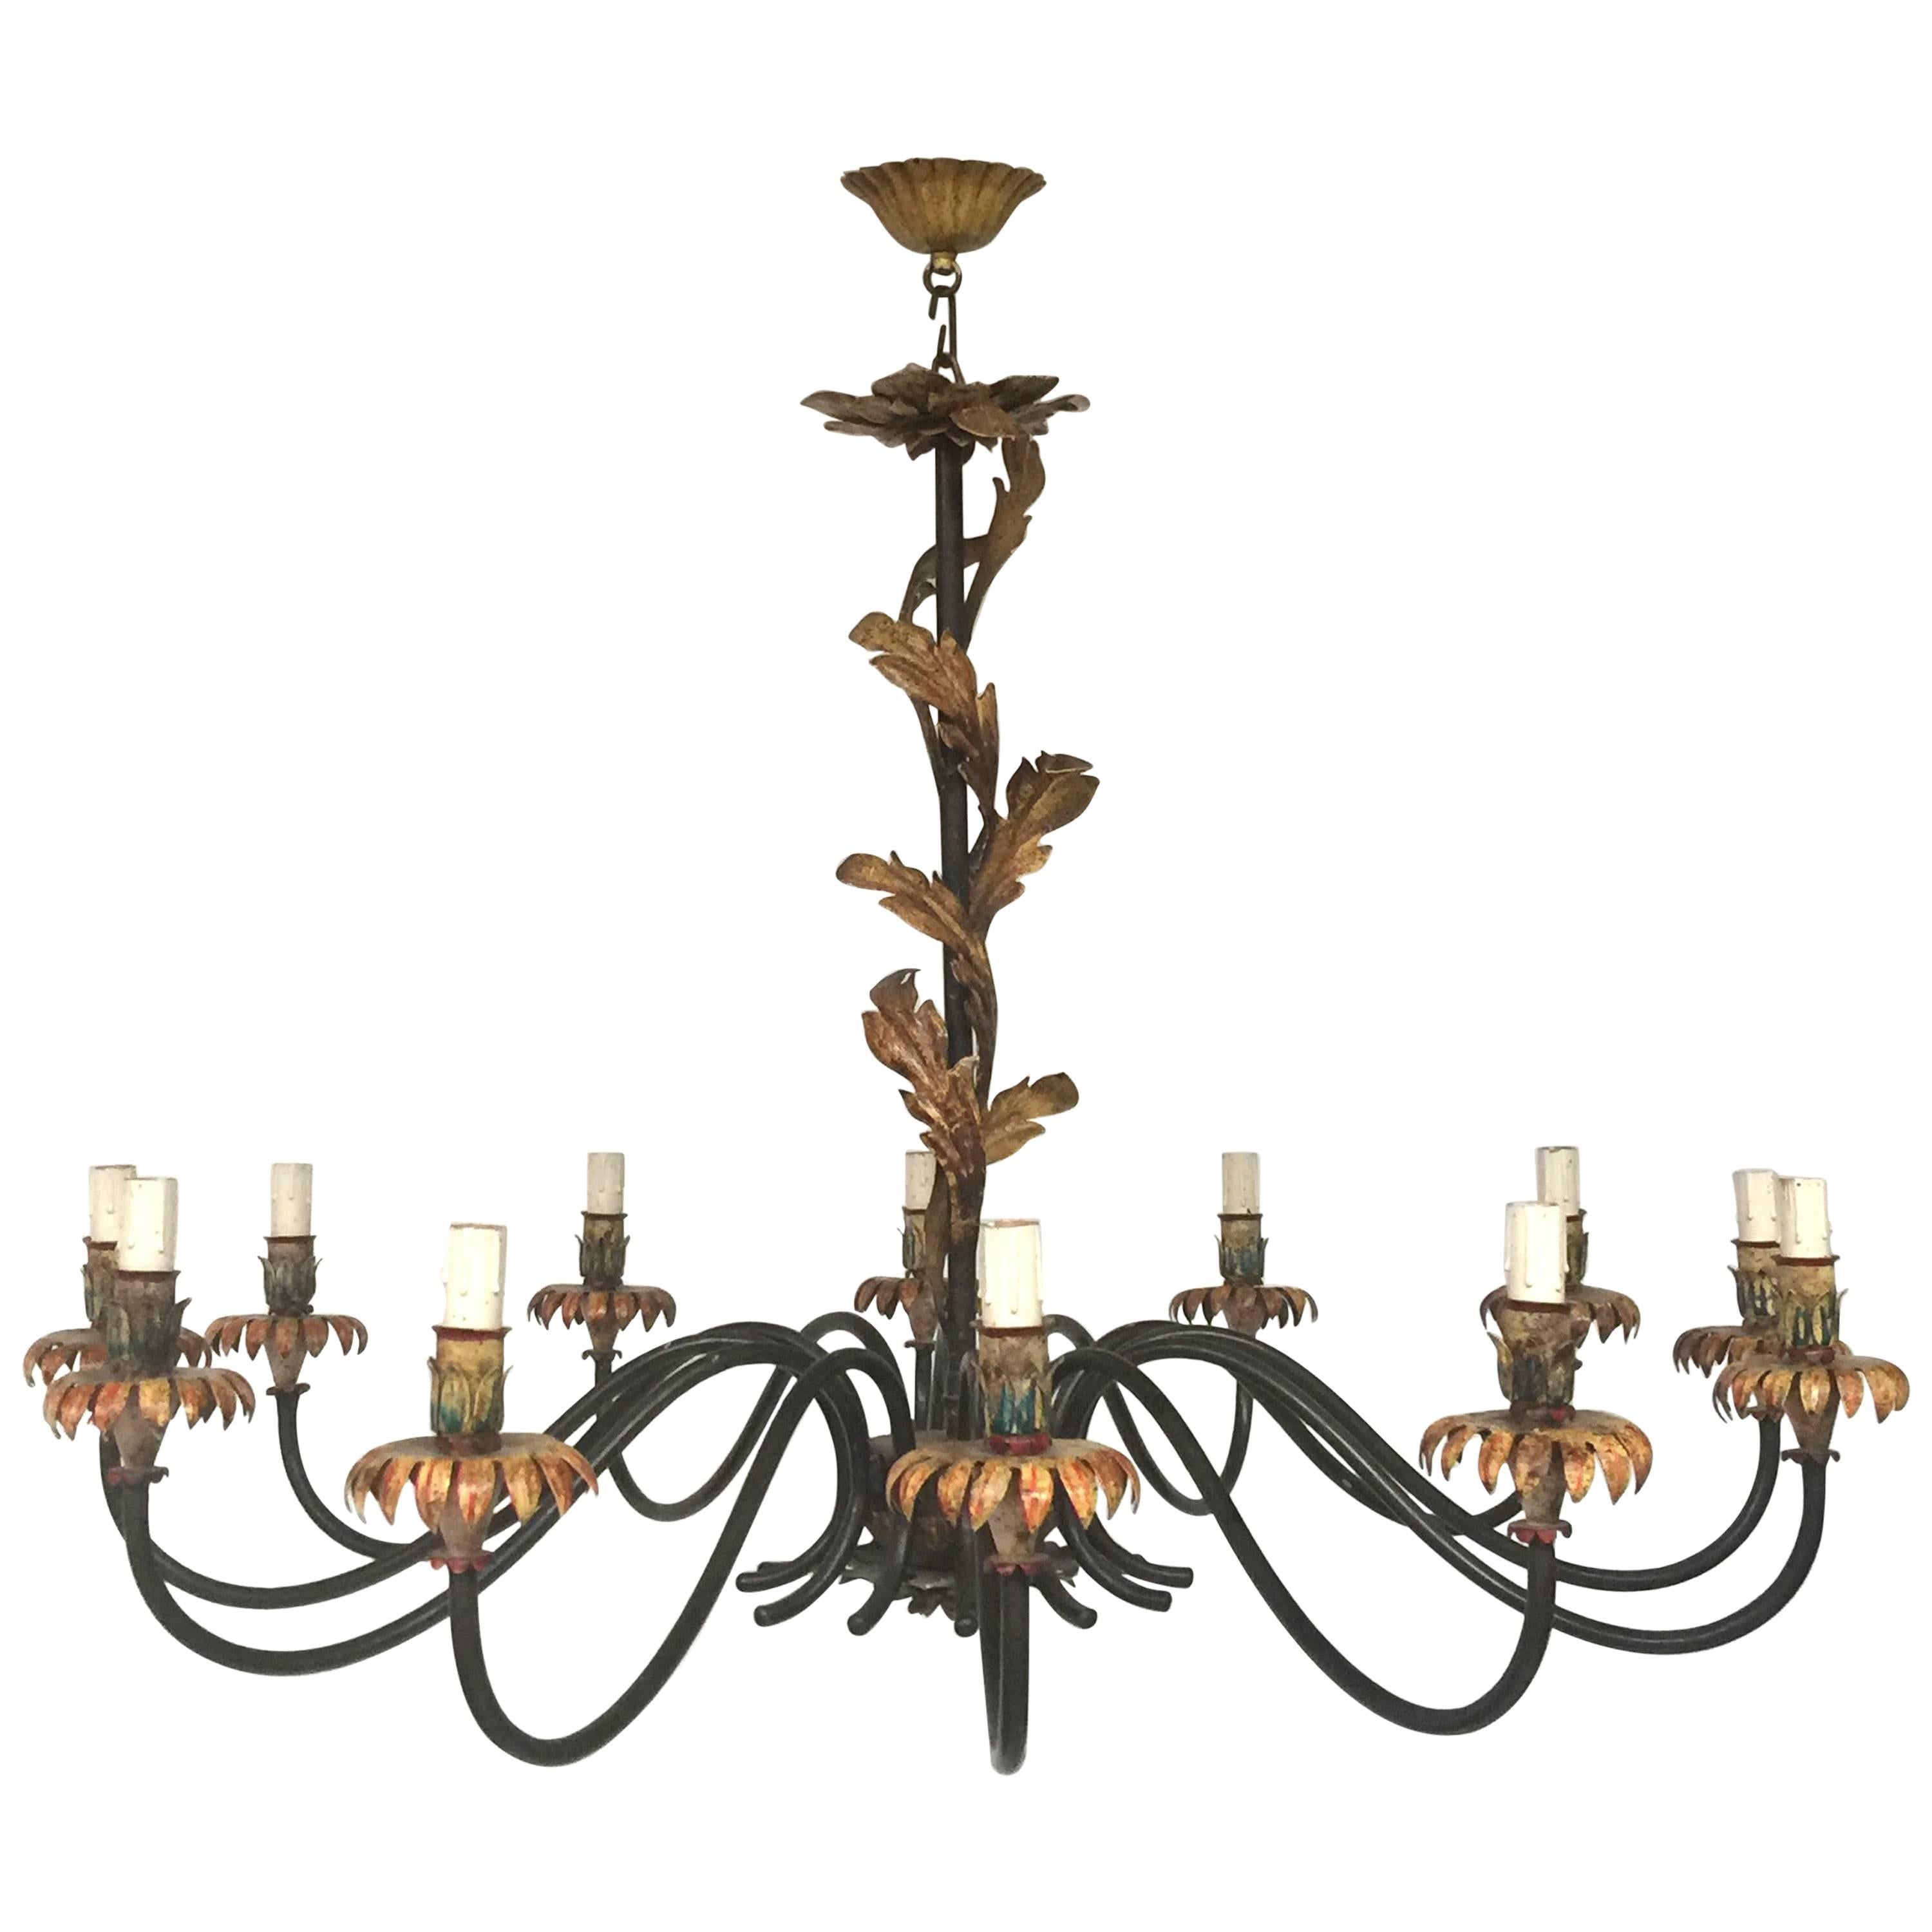 Twelve Lights Lacquered Wrought Iron Chandelier